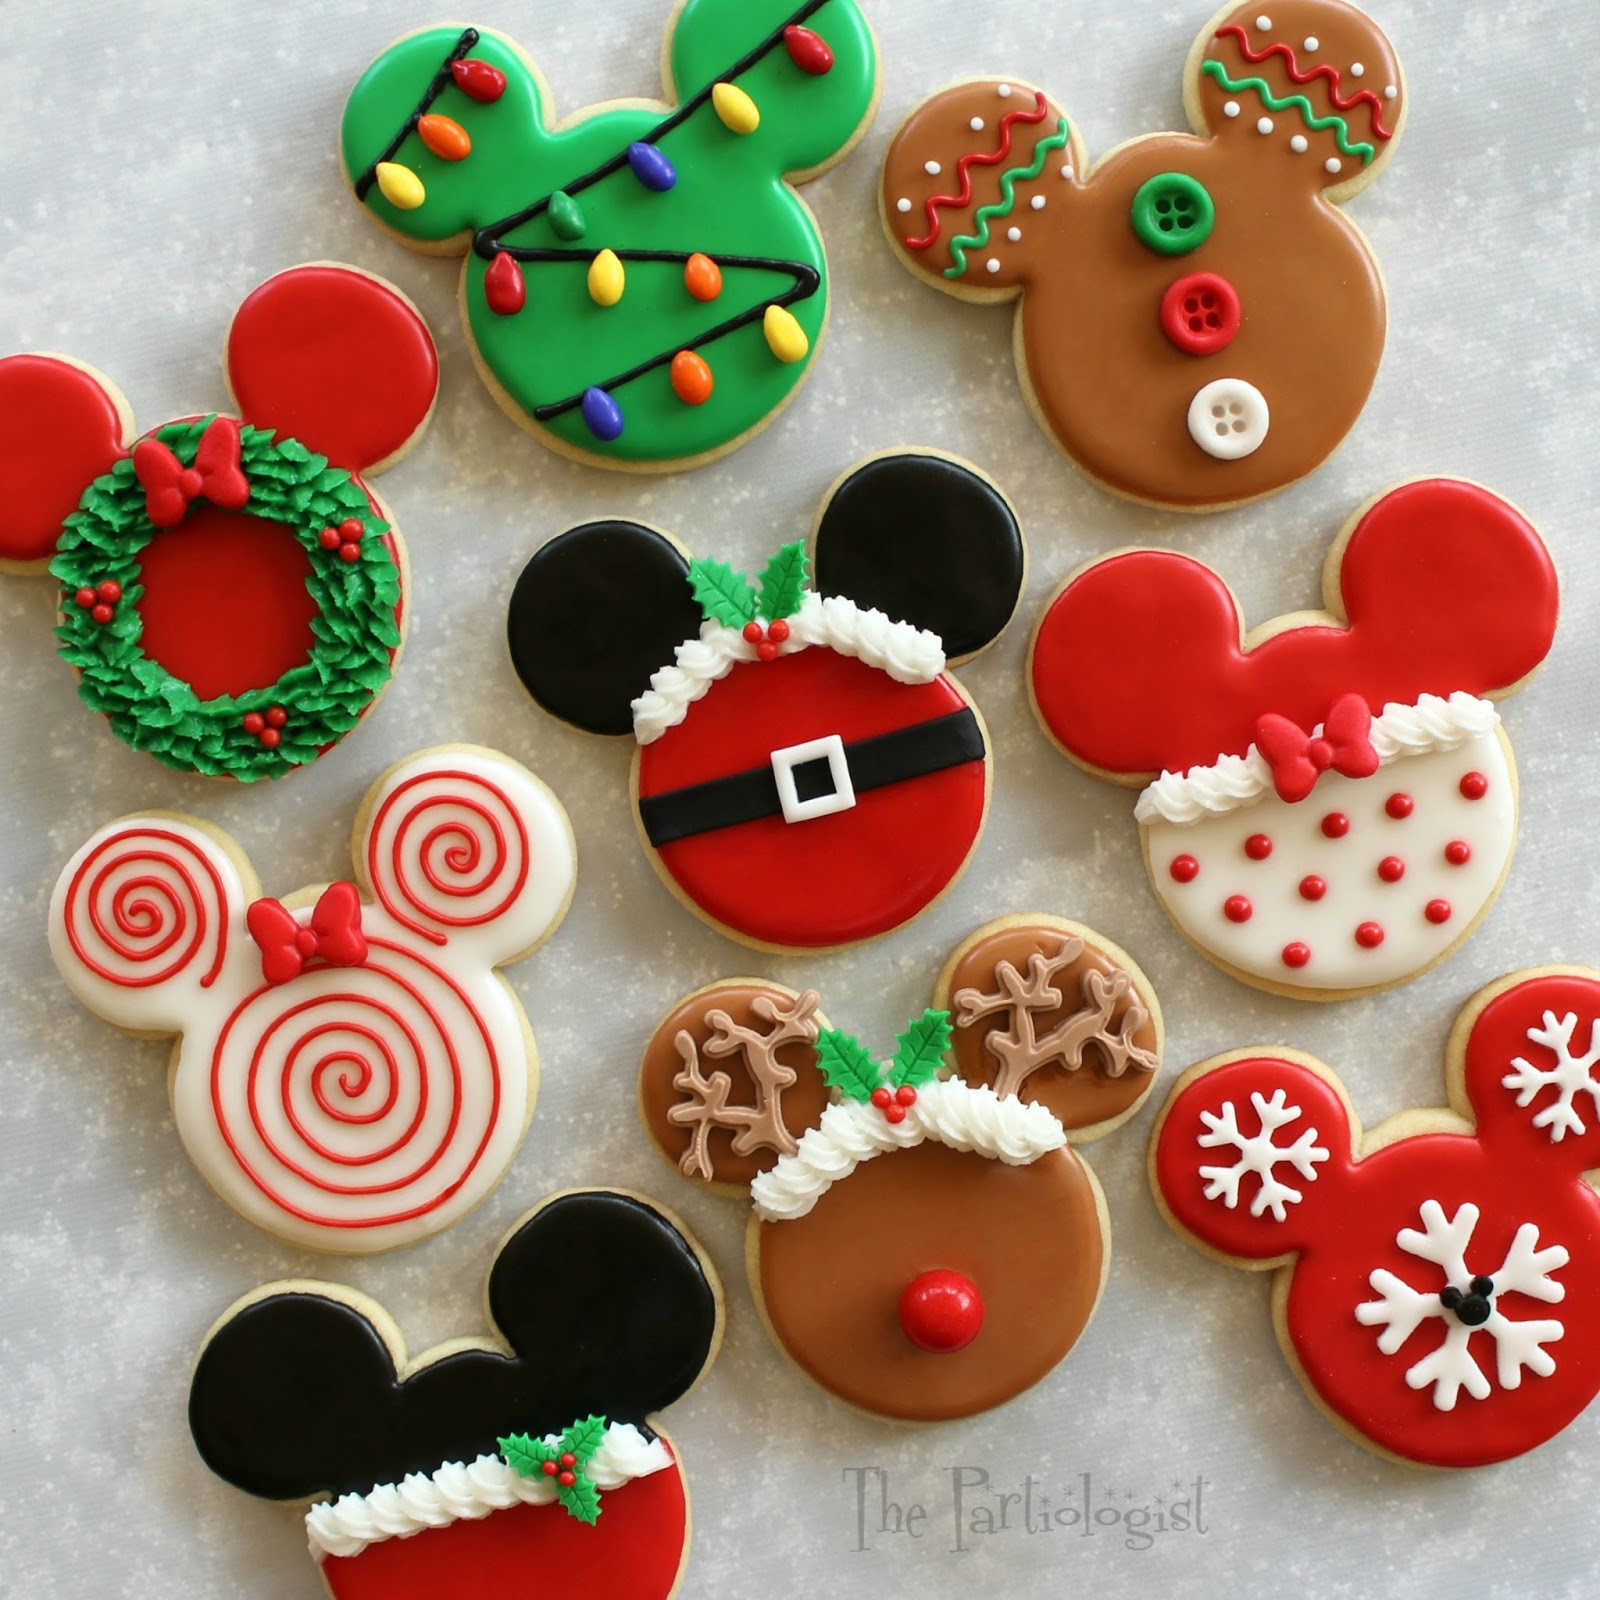 Baking Christmas Cookies
 The Partiologist Disney Themed Christmas Cookies